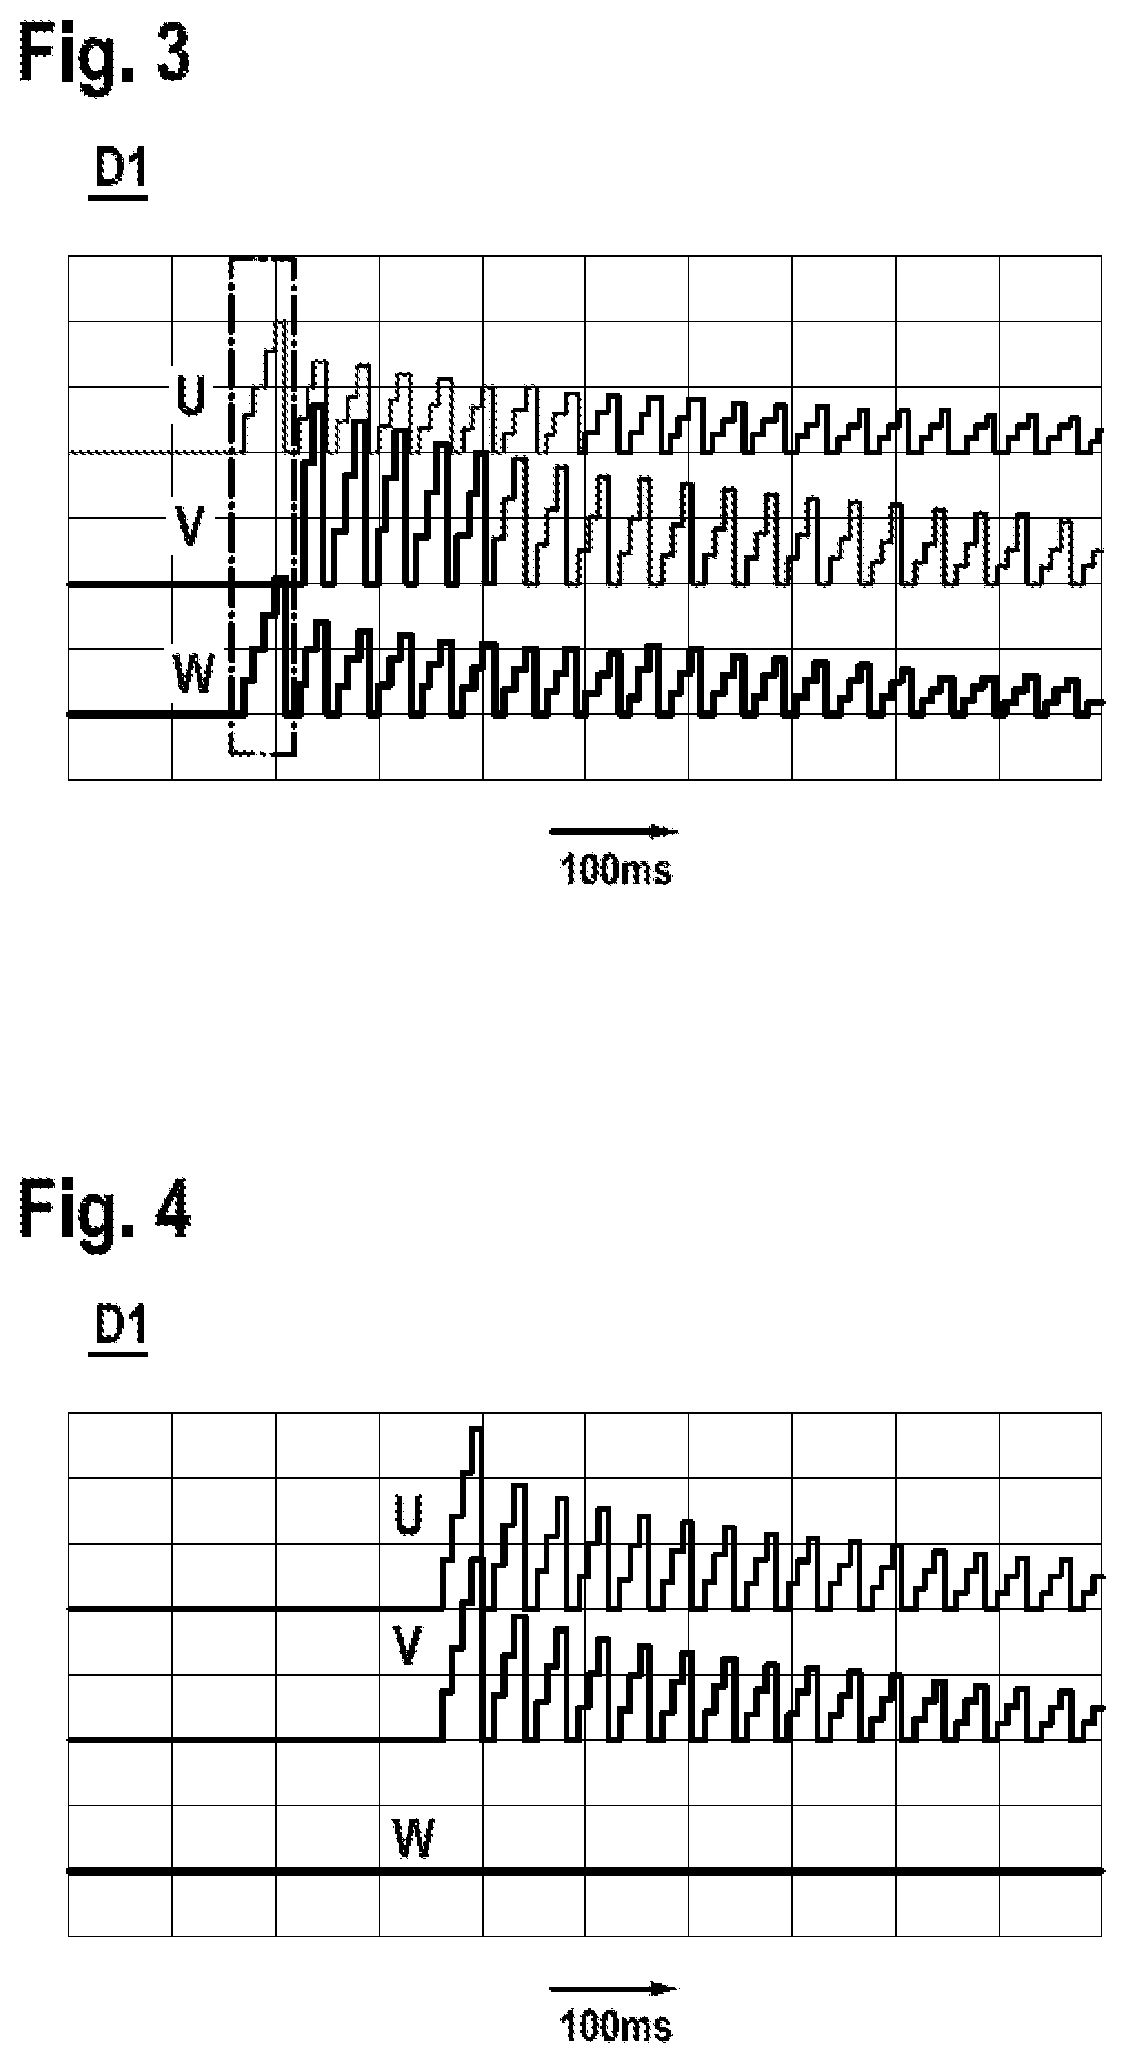 Determination of an interrupted motor phase of an electric motor